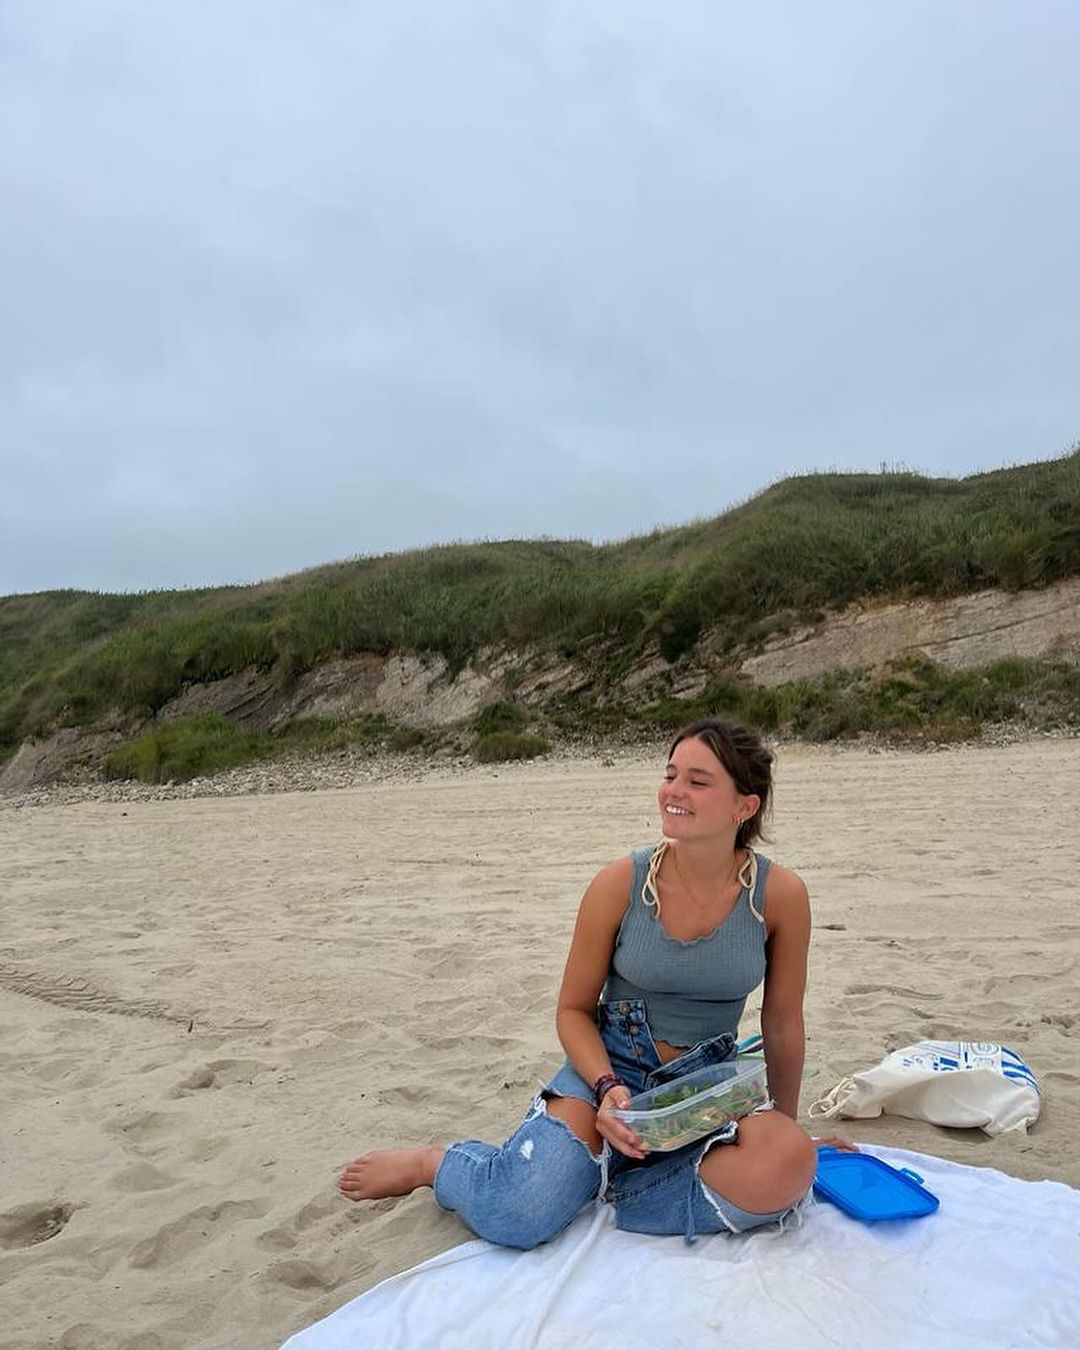 Trip leader Miriam sitting on a blanket in the sand with a Tupperware in hand.